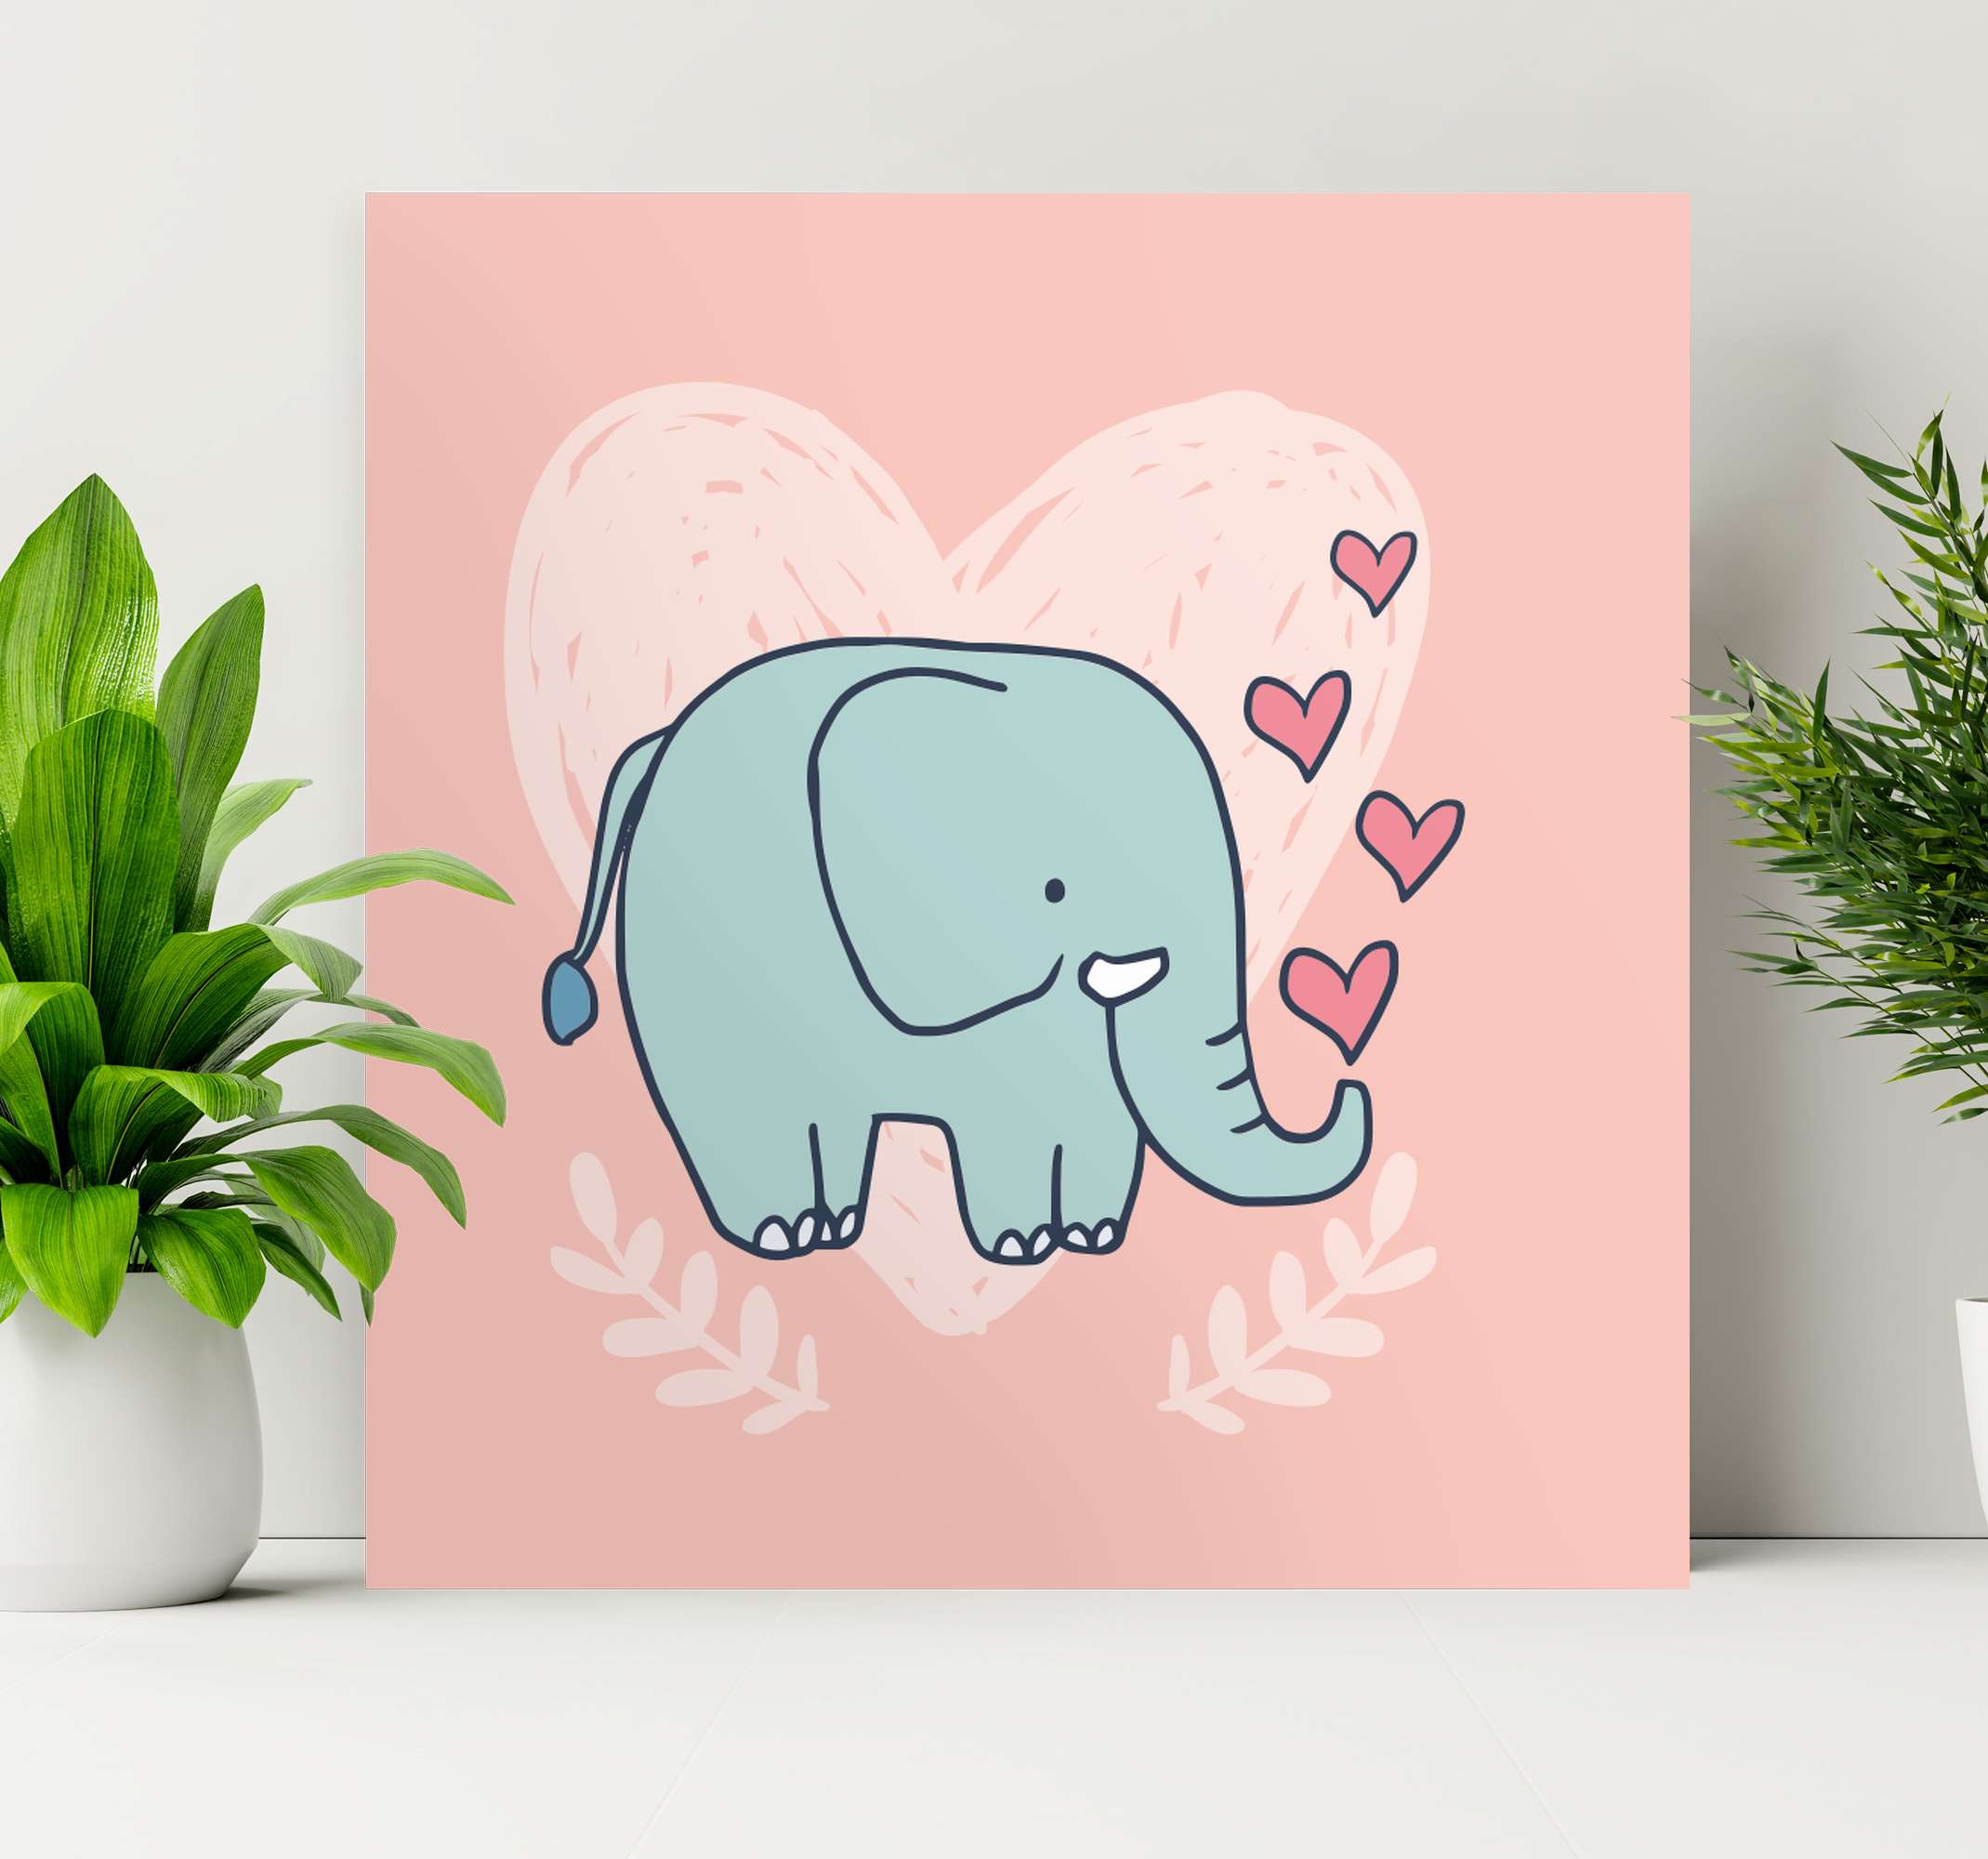 Cute elephant blowing hearts from snout wall pictures for nursery -  TenStickers